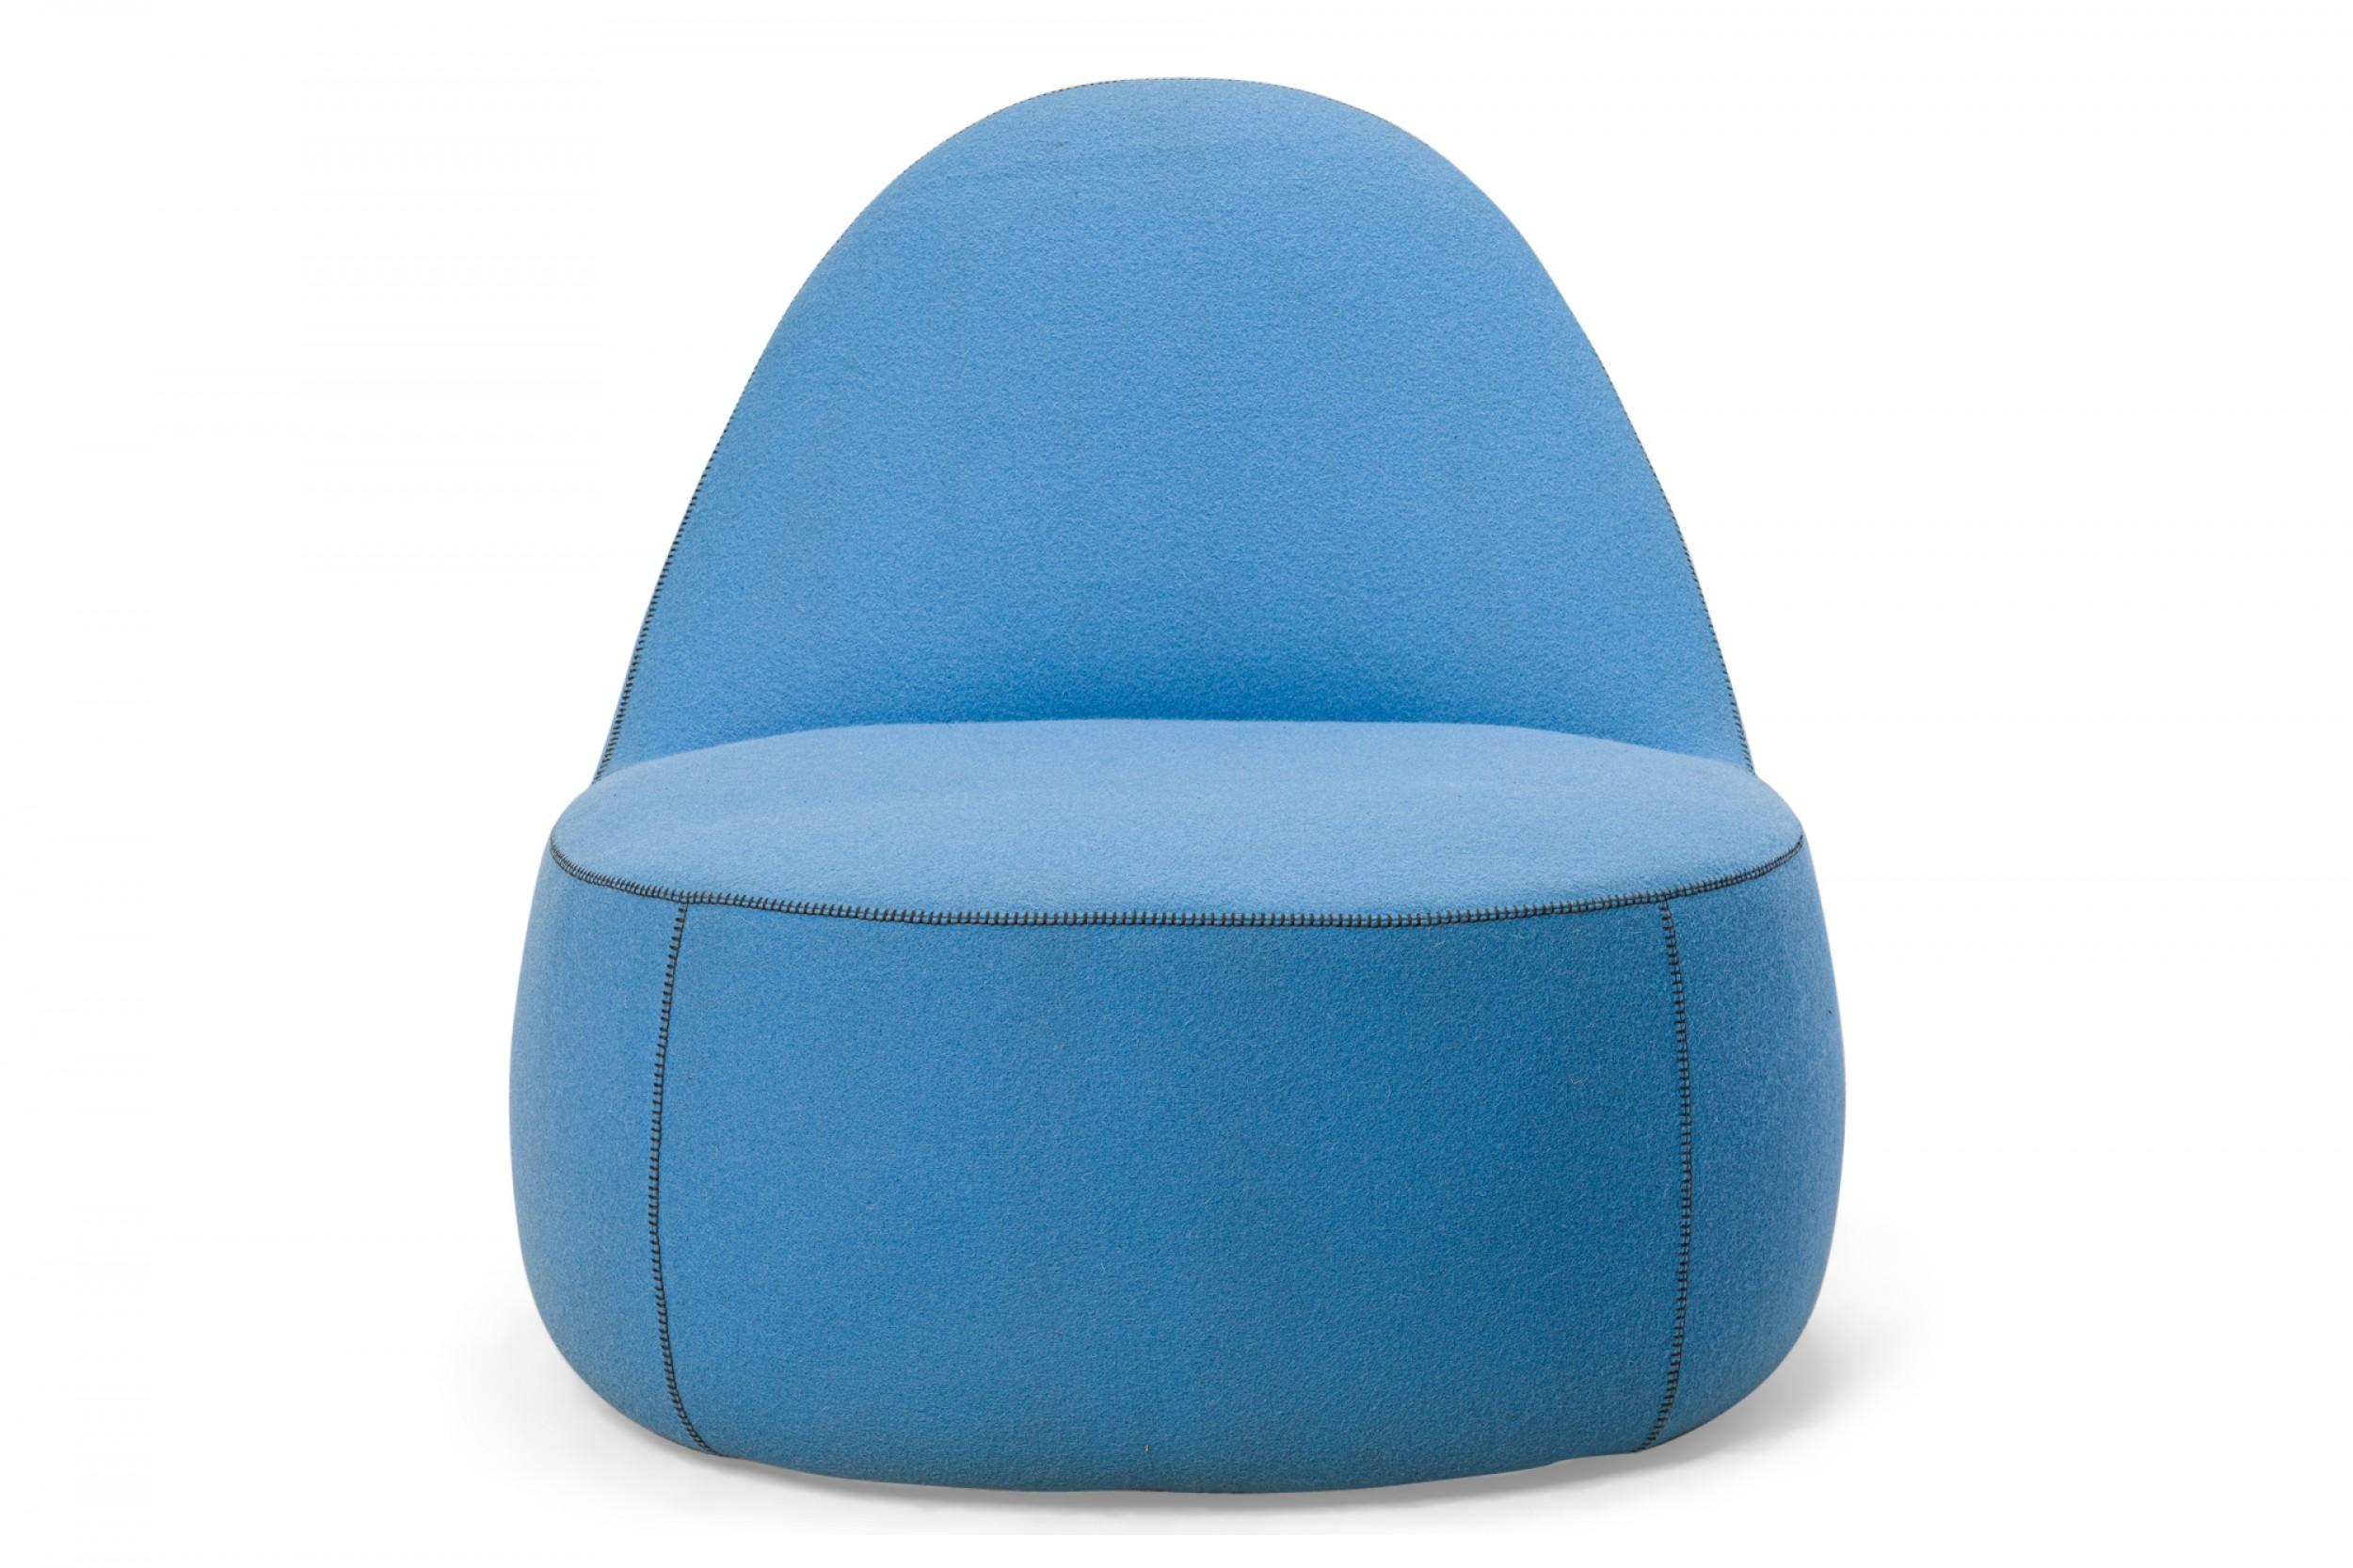 PAIR of American Contemporary slipper / side chairs with light blue felt upholstery with dark blue contrast blanket stitching around the seams, wide seats, and tapered backs, with a leather handle down each back, resting on concealed casters.